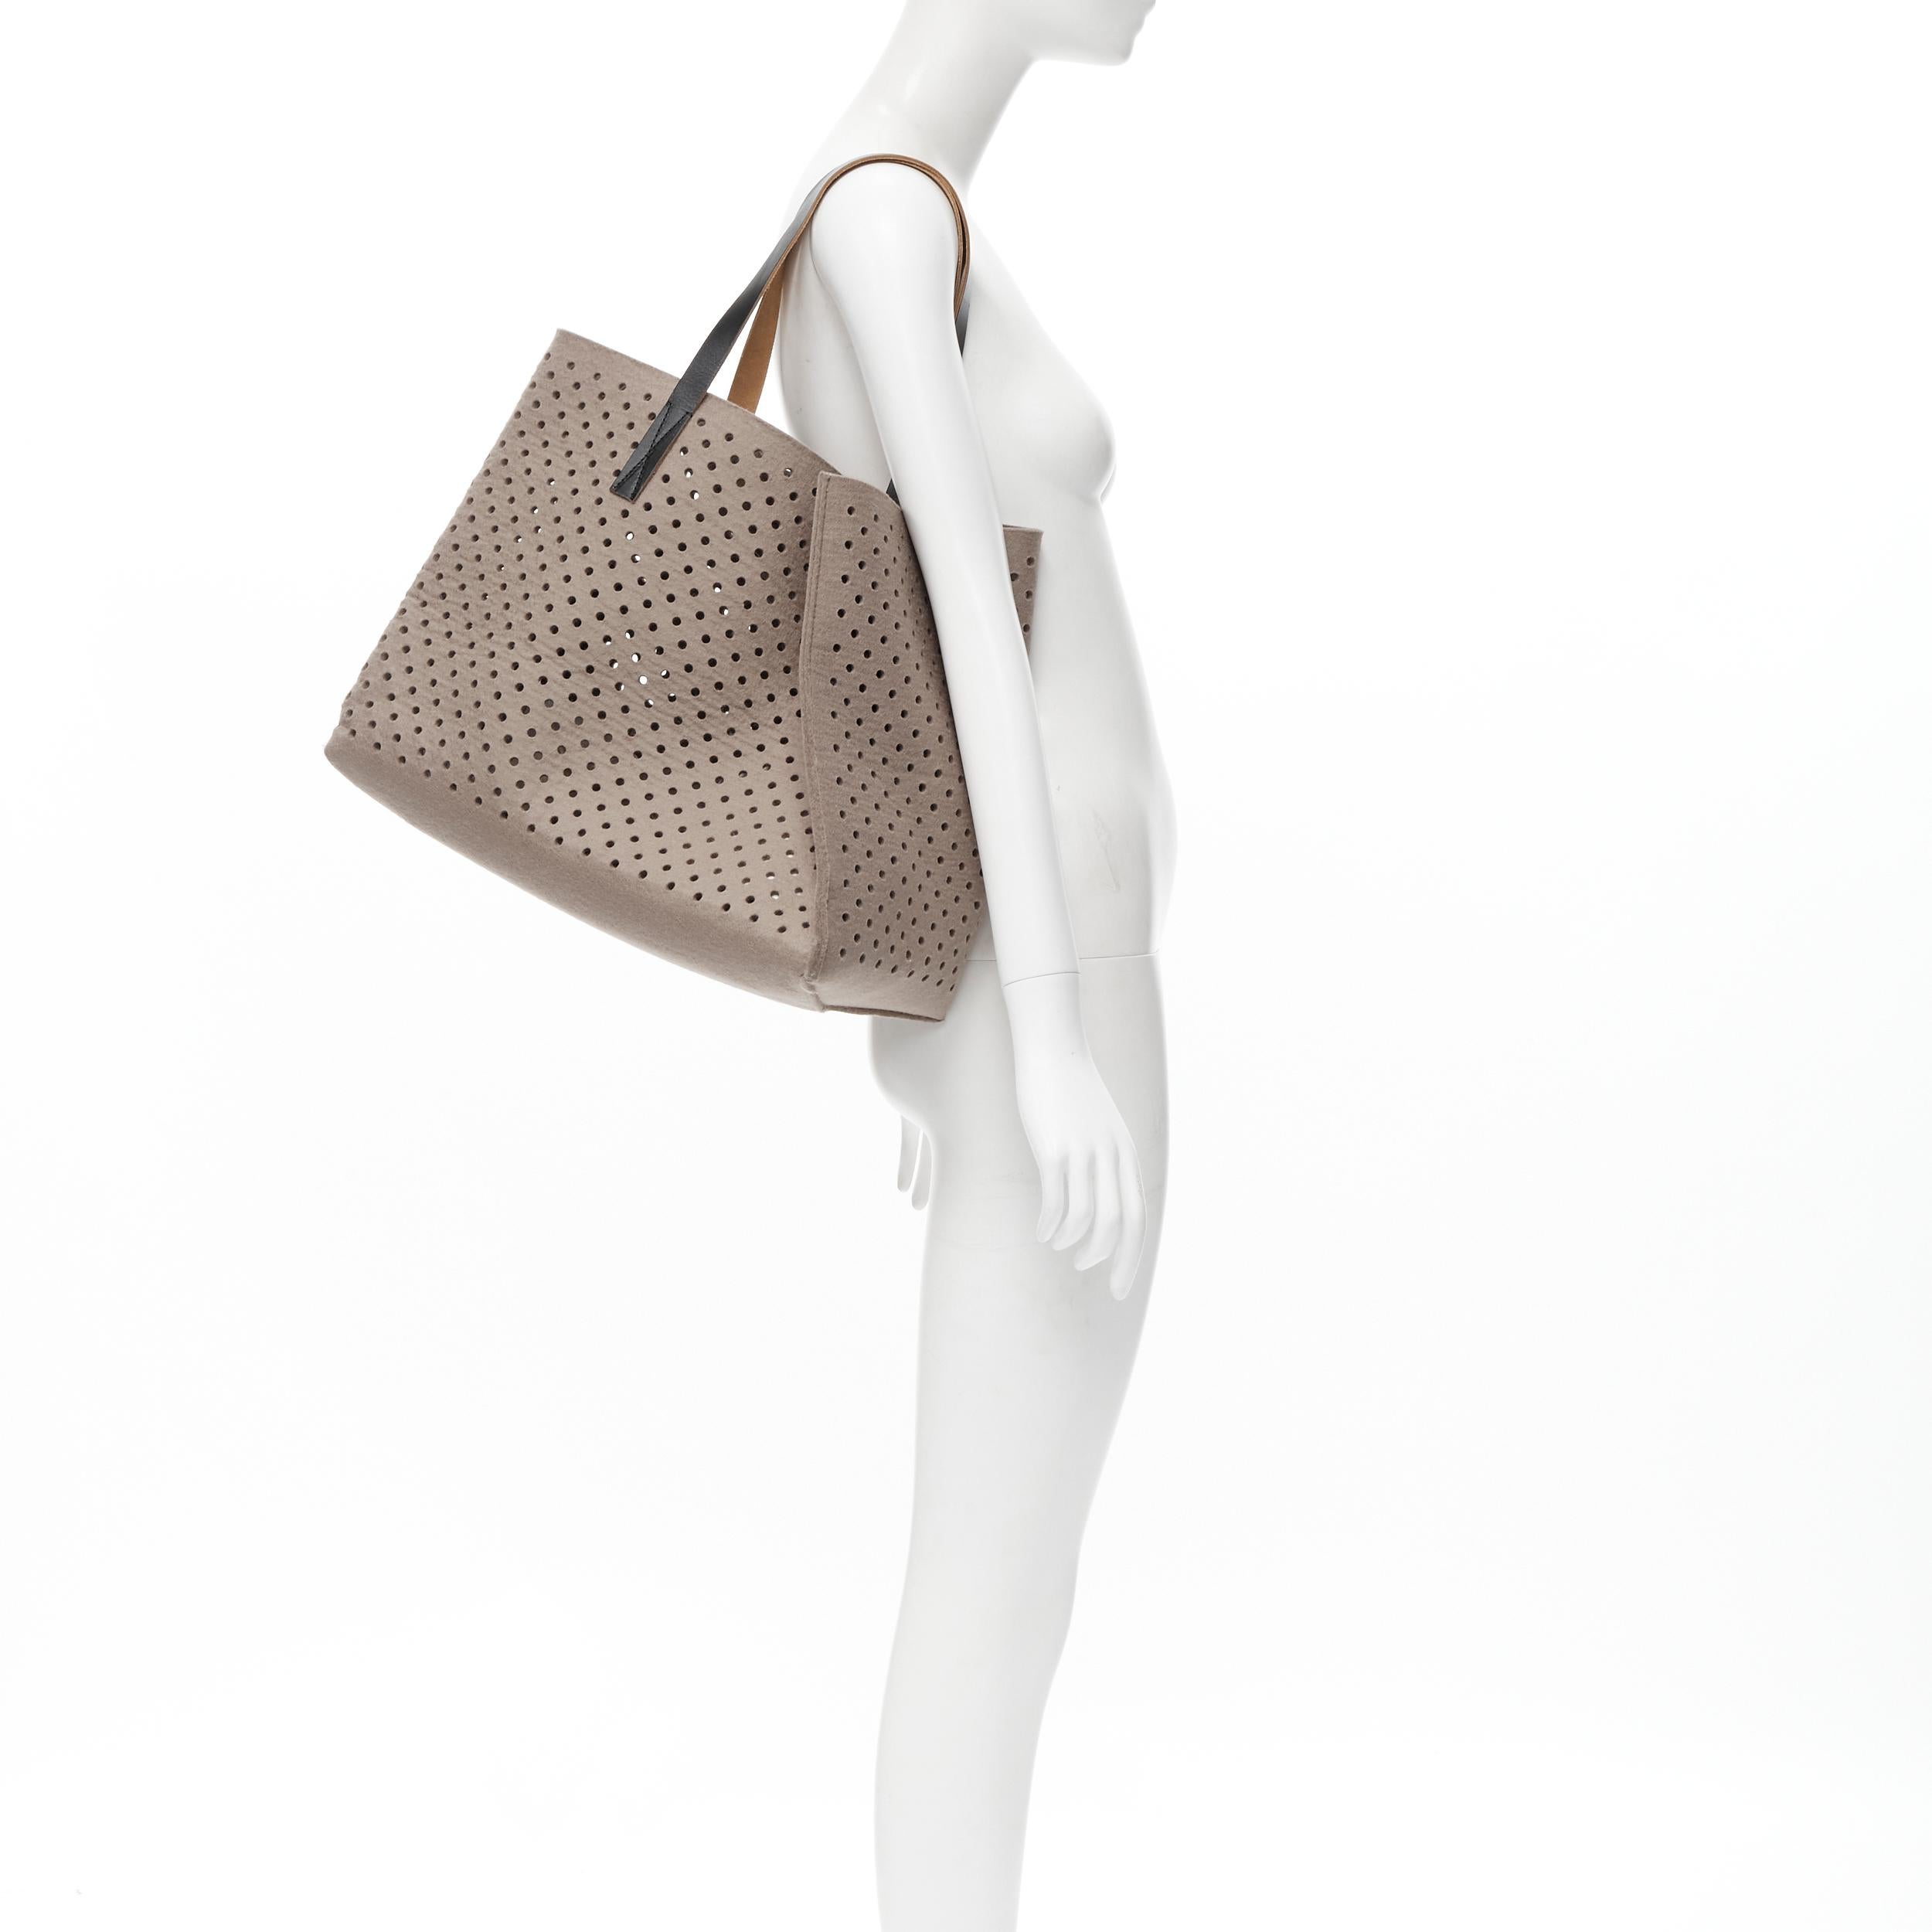 MARNI grey perforated heavy wool felt asymmetric tote bag 
Reference: CELG/A00021 
Brand: Marni 
Model: Perforated wool tote 
Material: Wool 
Color: Brown 
Pattern: Solid 
Extra Detail: Removable small pouch at lining. 
Estimated Retail Price: US